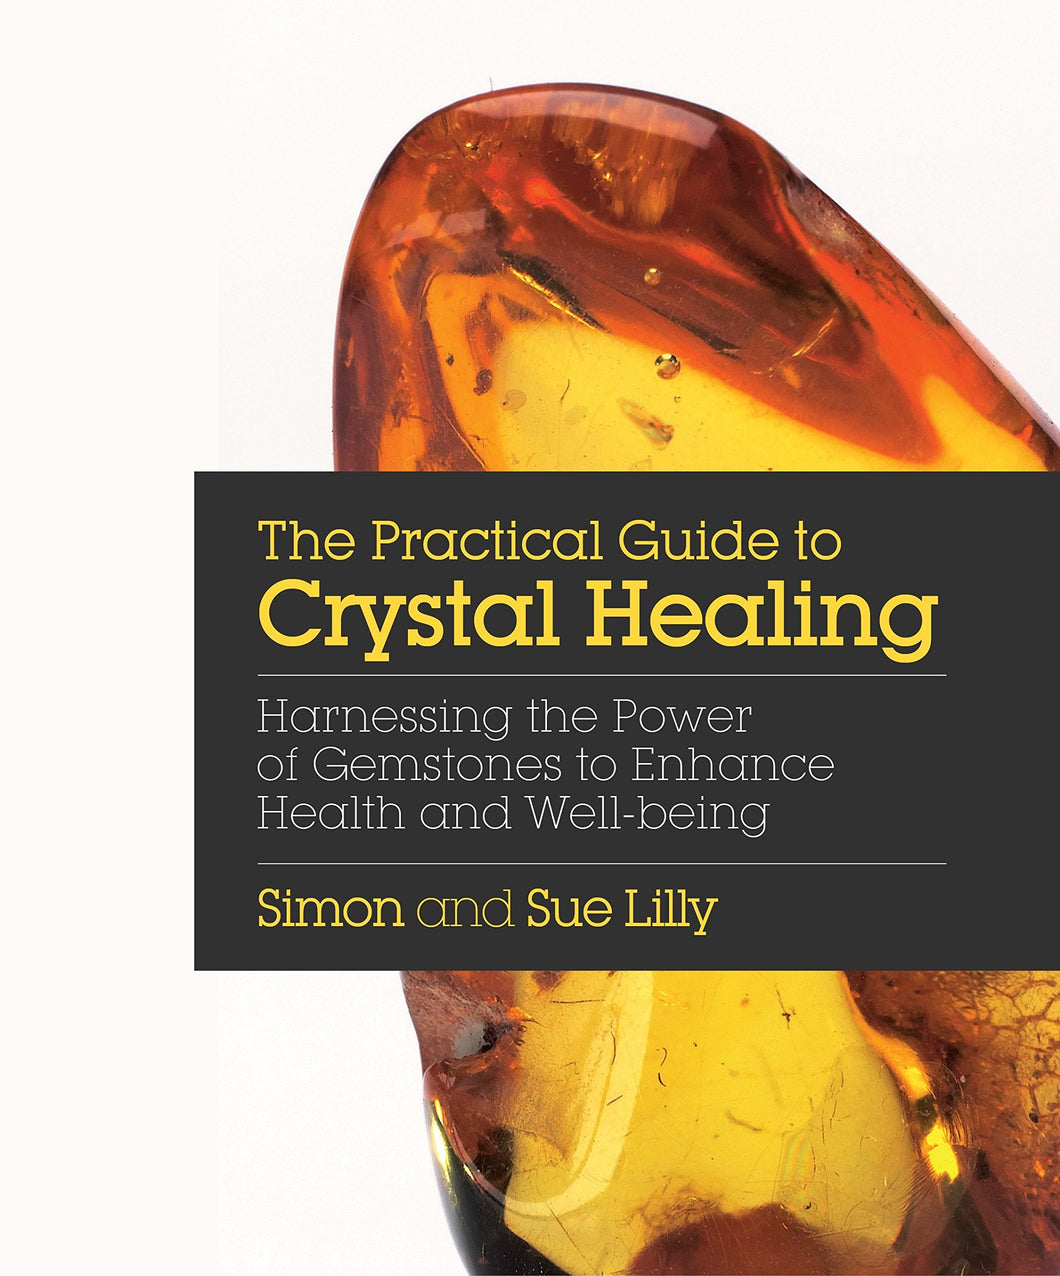 The Practical Guide to Crystal Healing: Harnessing the Power of Gemstones to Enhance Health and Well-being